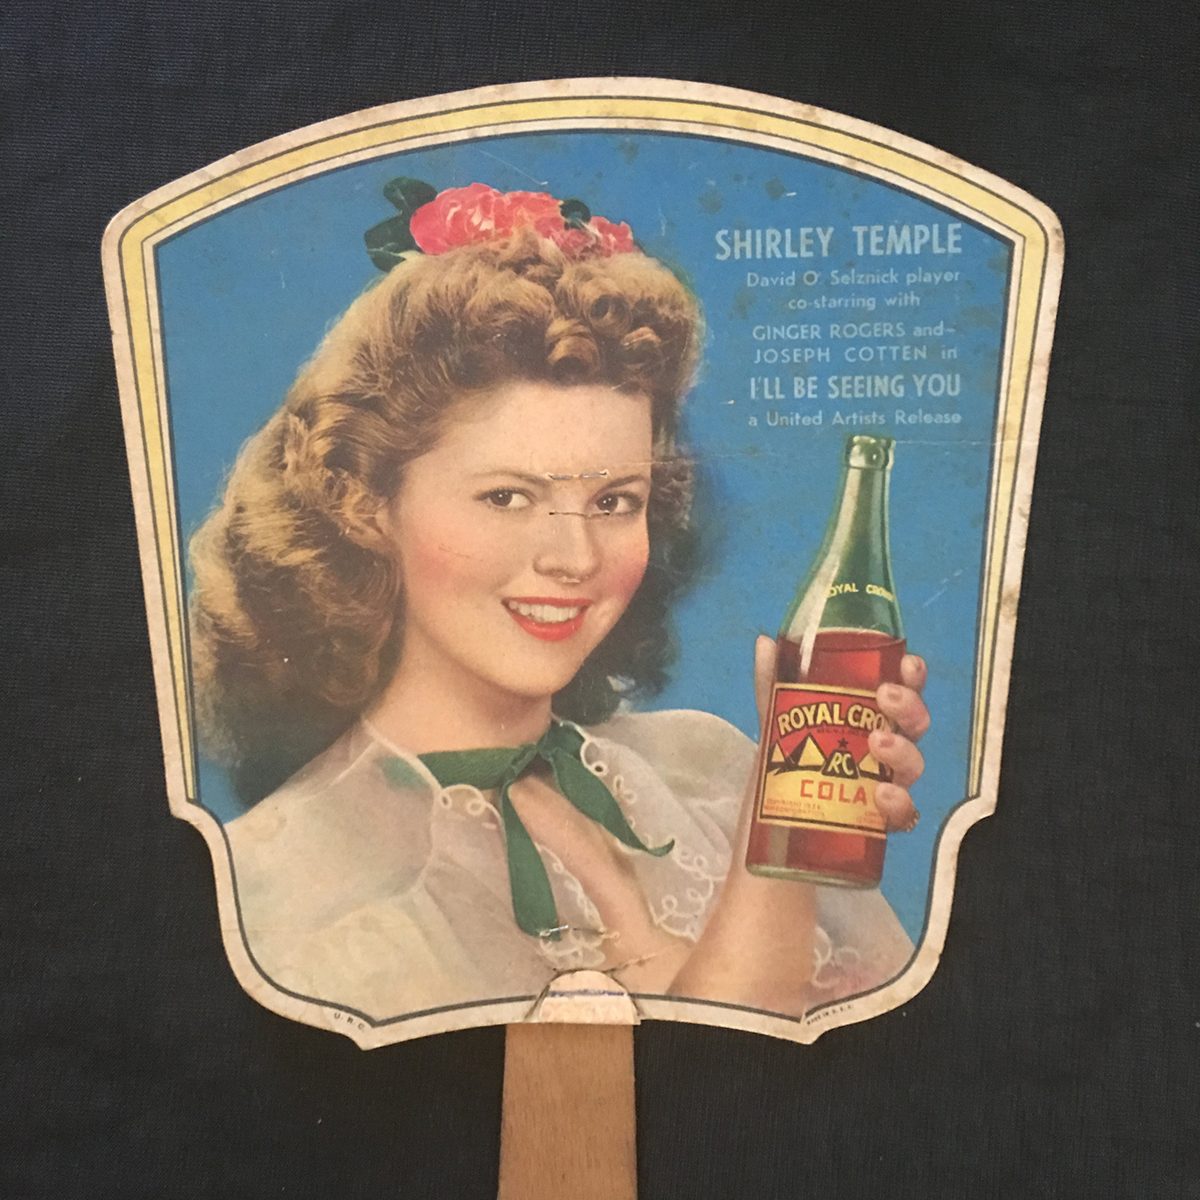 Vintage 1940's Shirley Temple RC COLA Advetising Movie Theather Giveaway Fan "I'll Be Seeing You" with Ginger Rogers & Joeseph Cotton